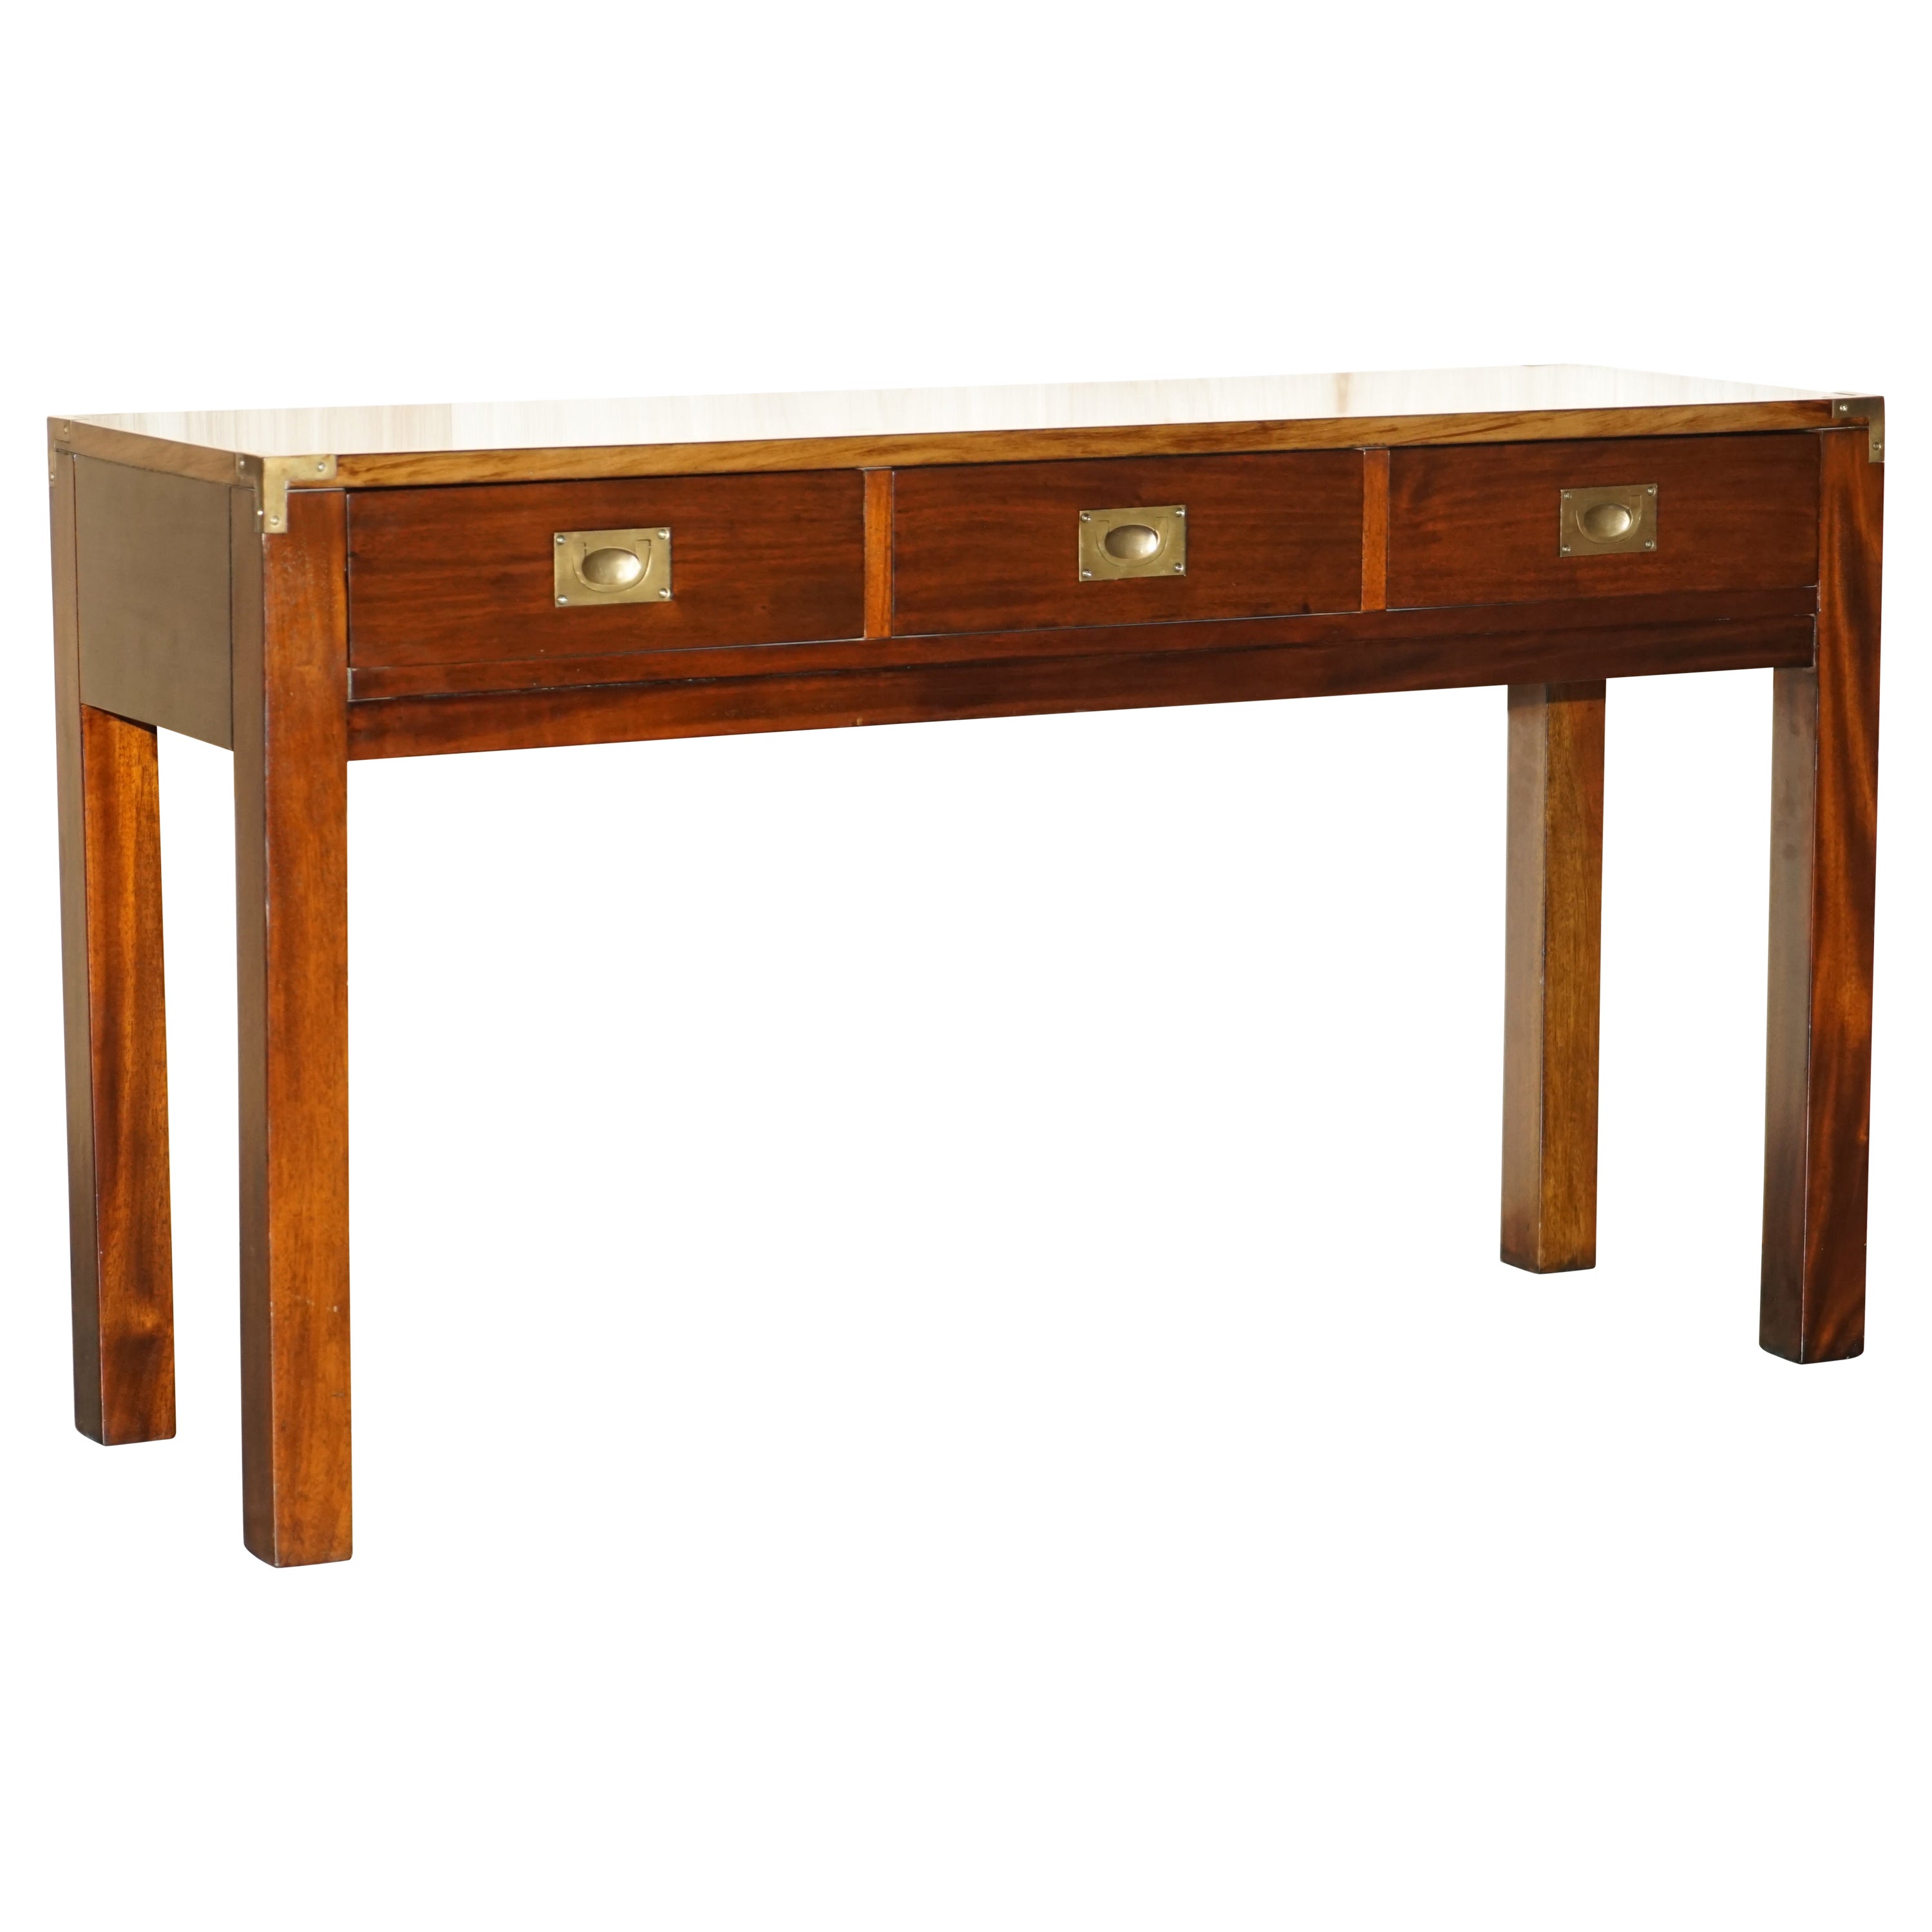 Lovely Vintage Harrods Kennedy Military Campaign Console Table Sideboard Drawers For Sale